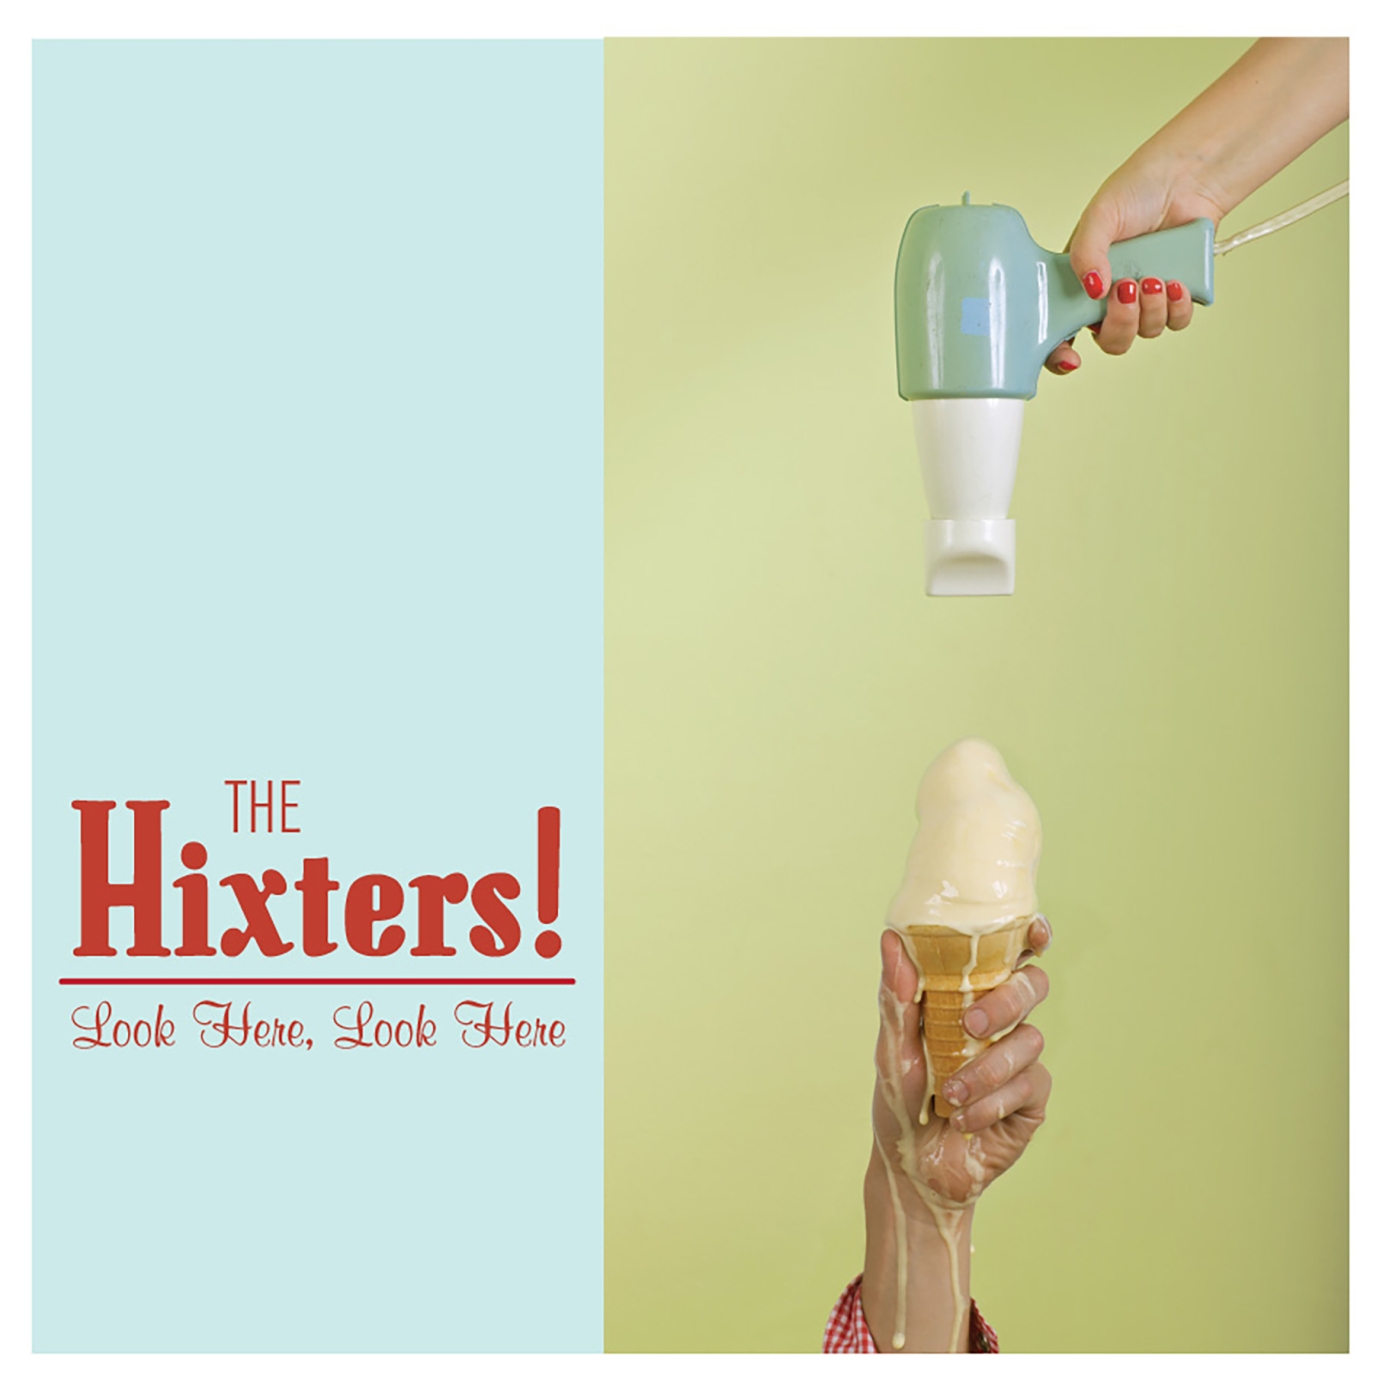 THE HIXSTERS! • LOOK HERE, LOOK HERE